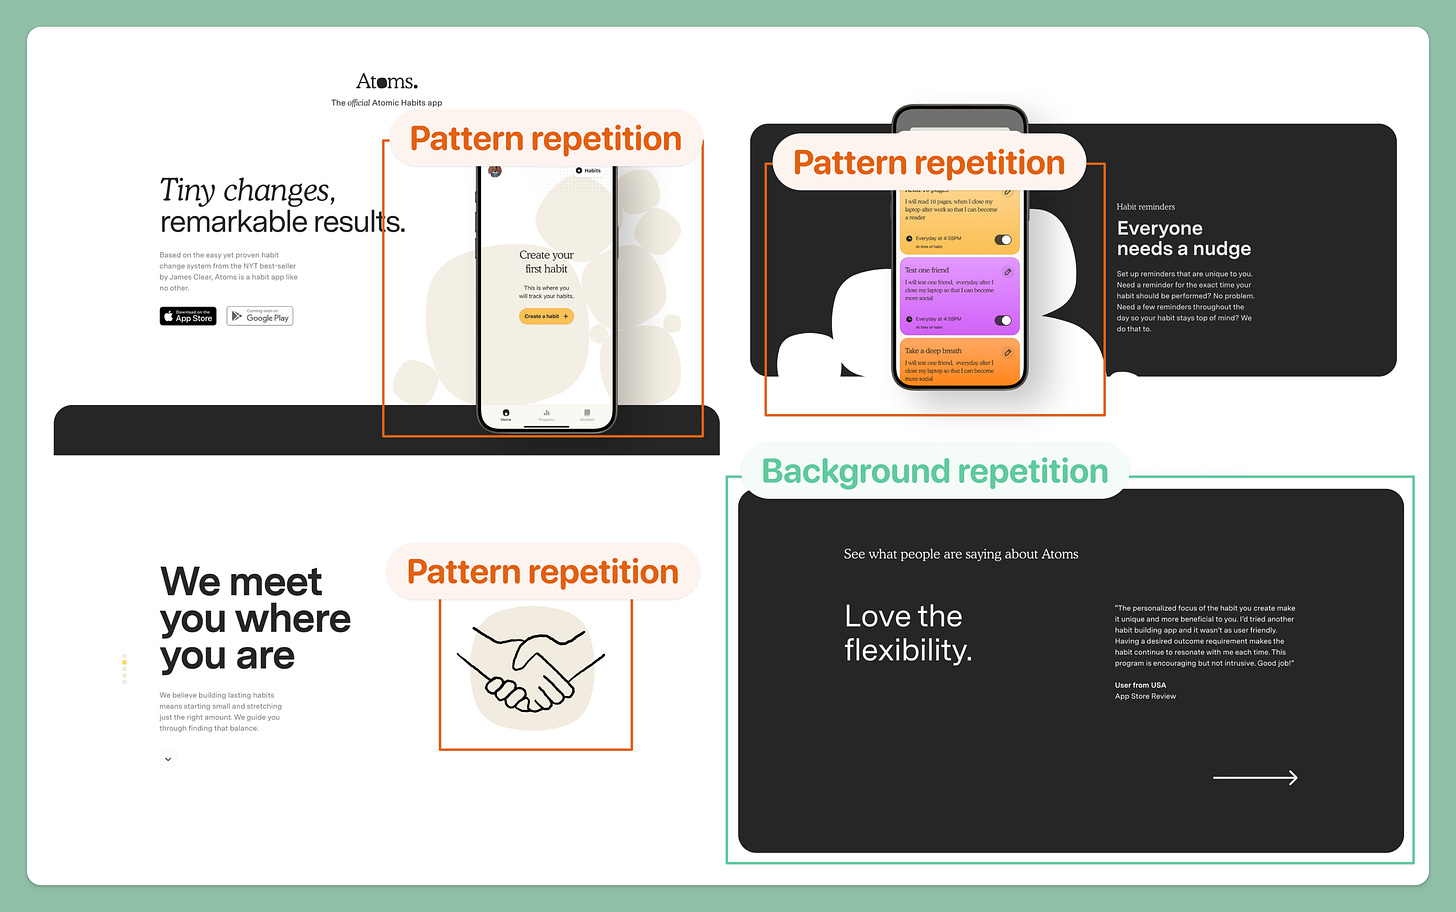 Atoms use repetition in their website design